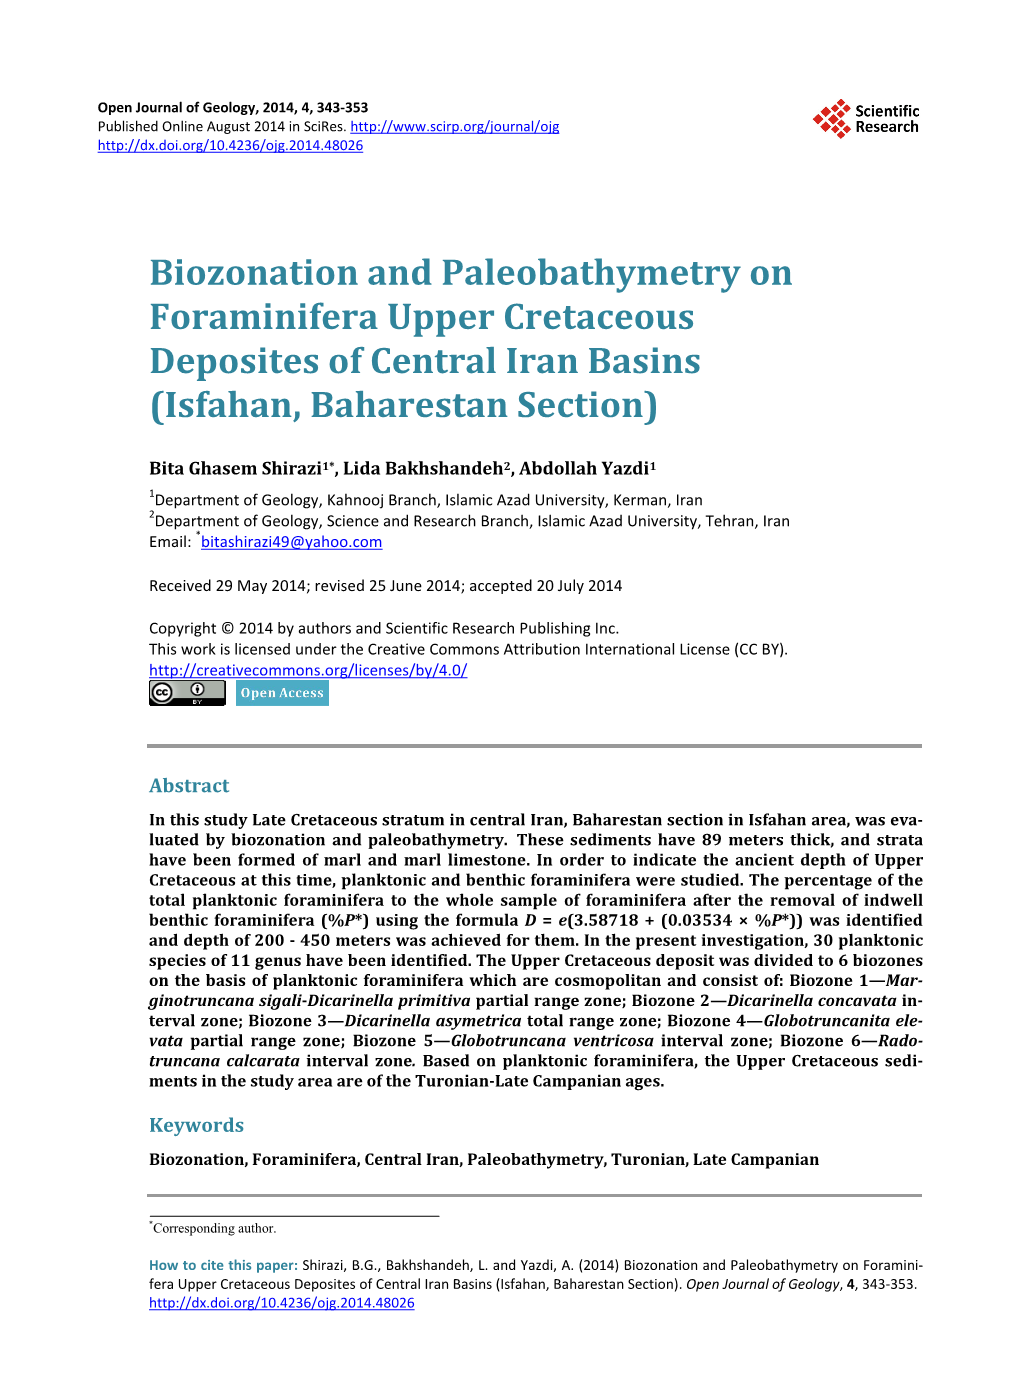 Biozonation and Paleobathymetry on Foraminifera Upper Cretaceous Deposites of Central Iran Basins (Isfahan, Baharestan Section)